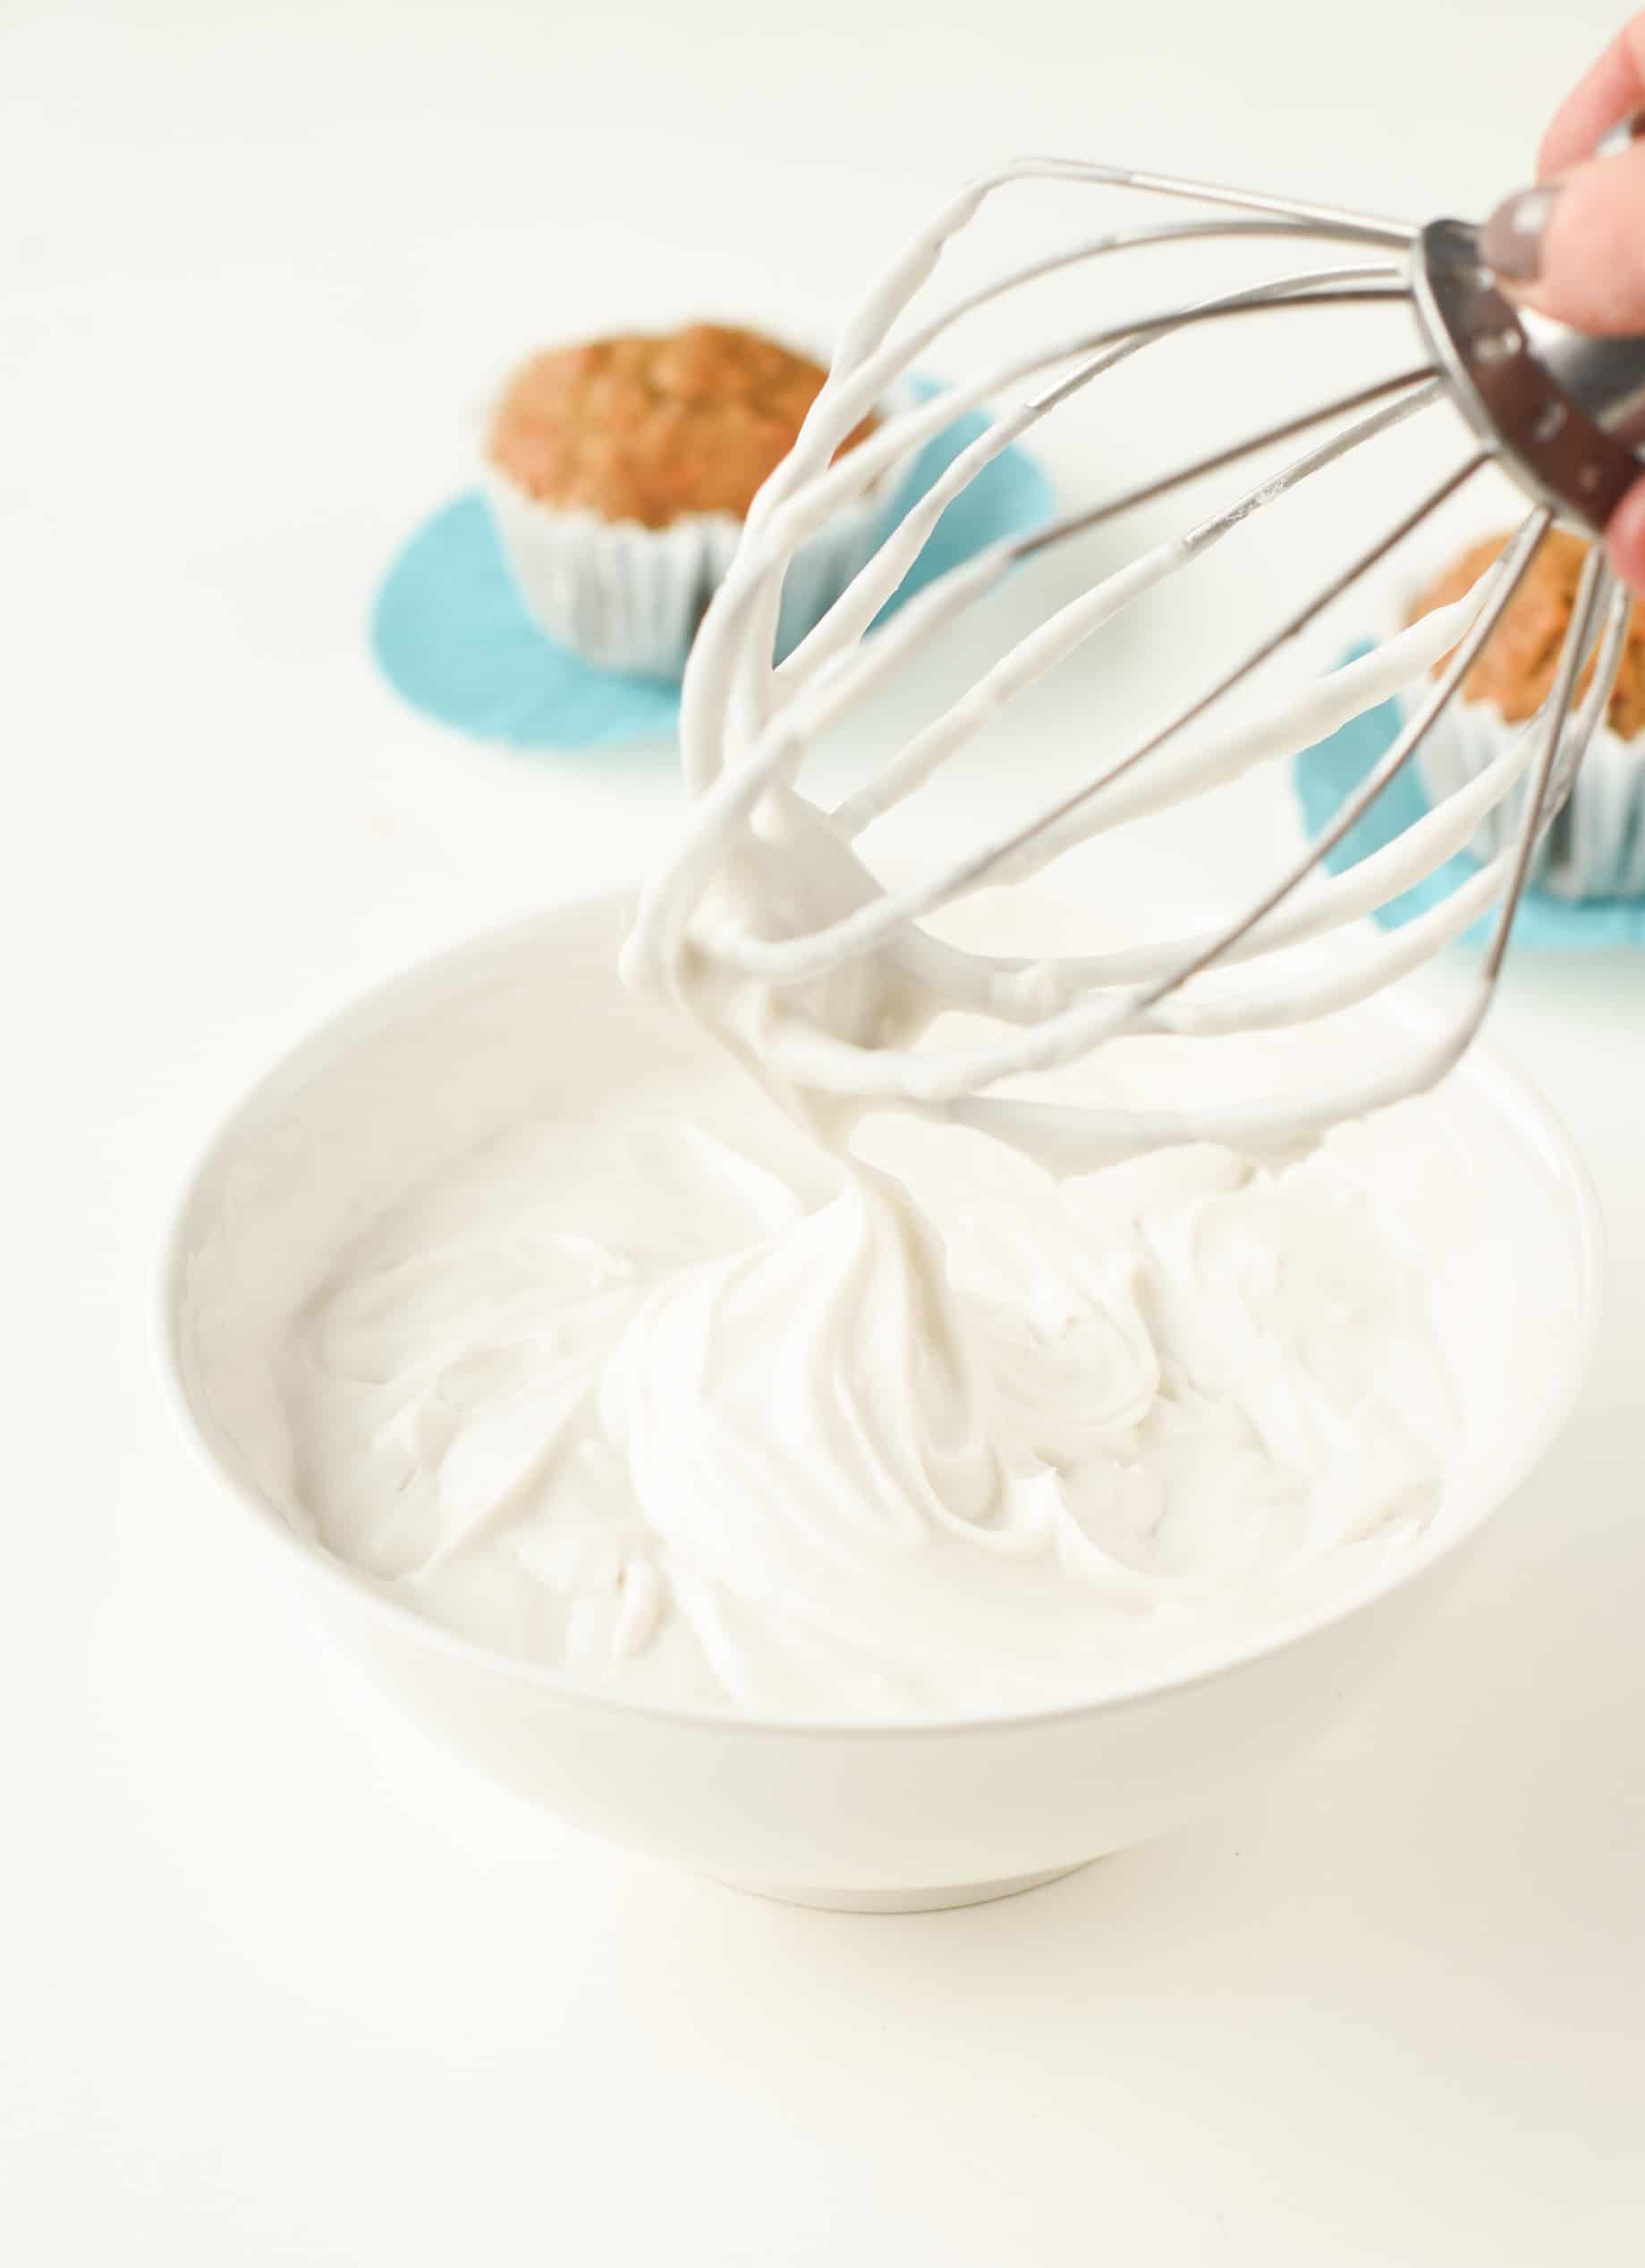 Whipped coconut cream in a bowl with the whisk attachment of a stand mixer and a muffin in the background.